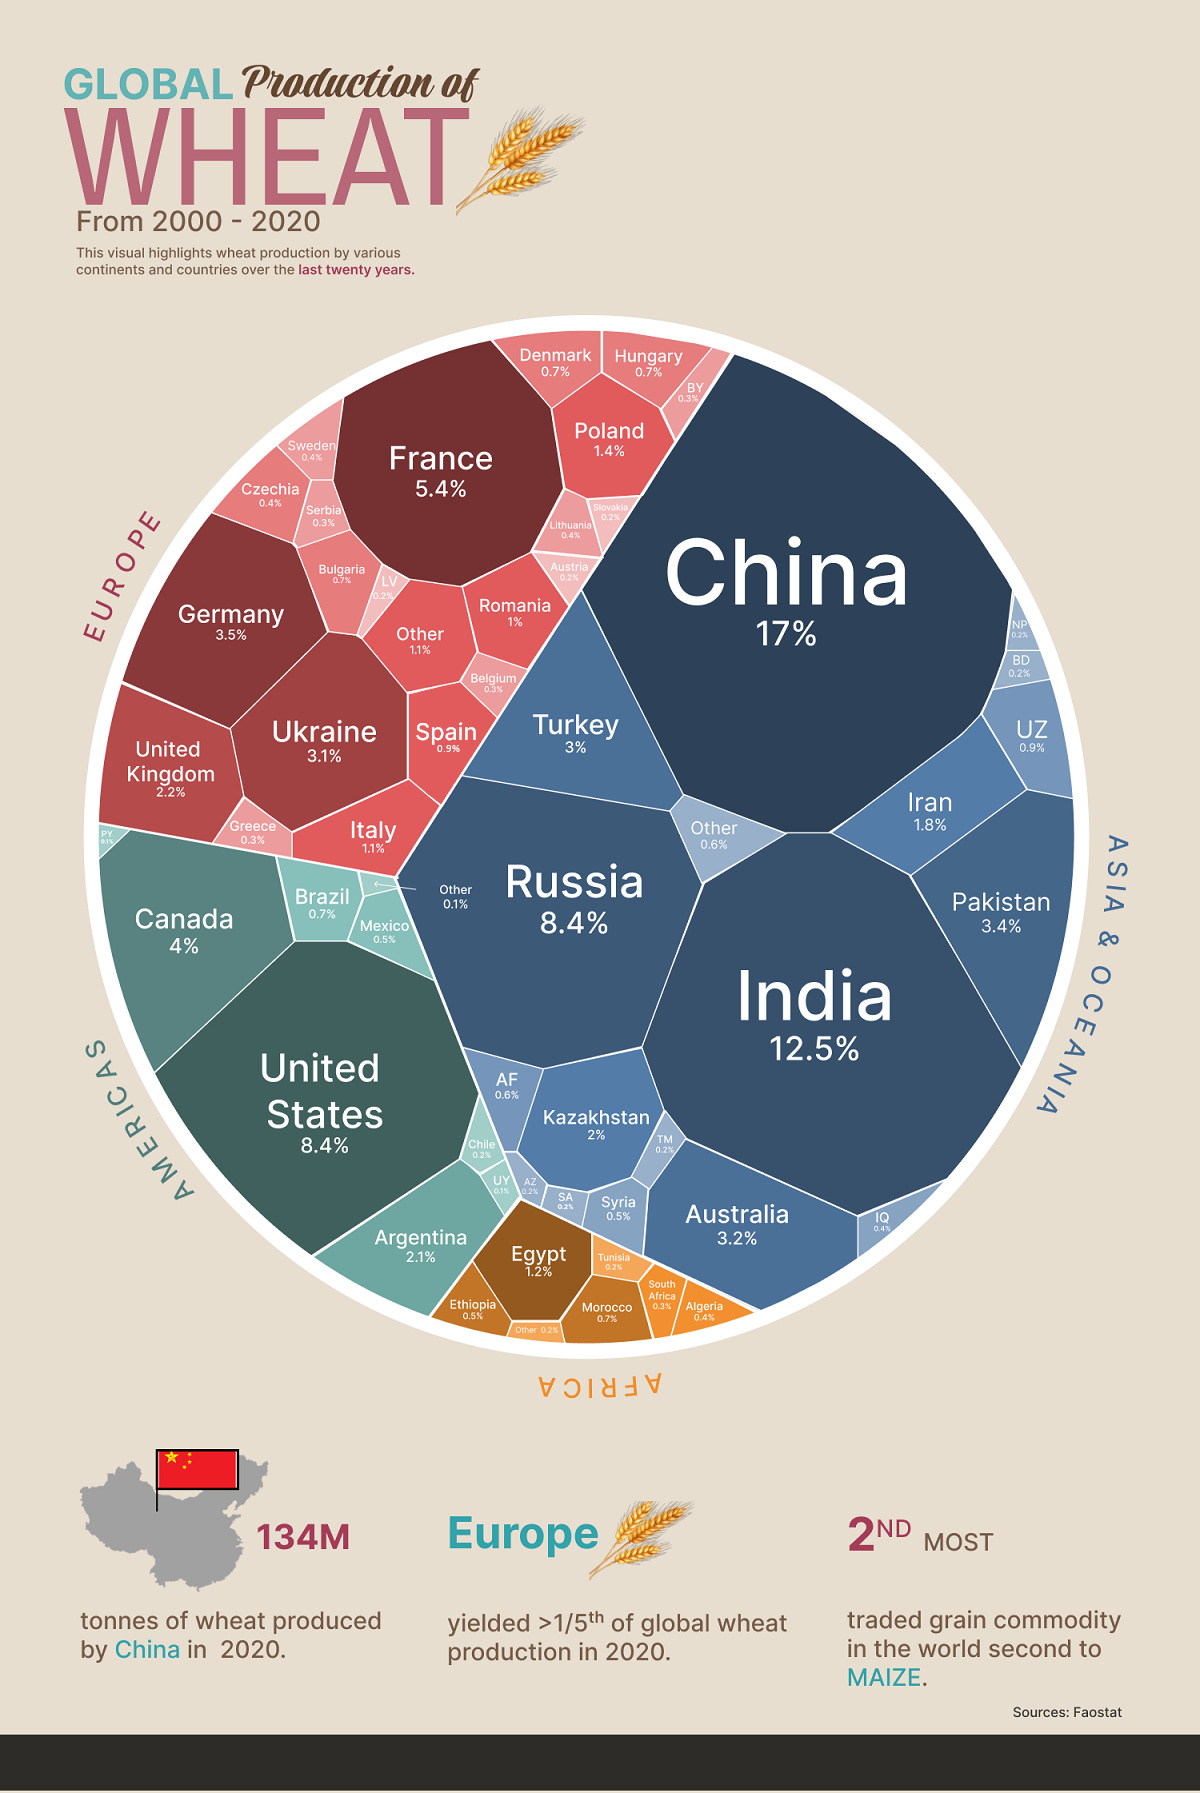 A map of the world's largest wheat producers from 2000-2020